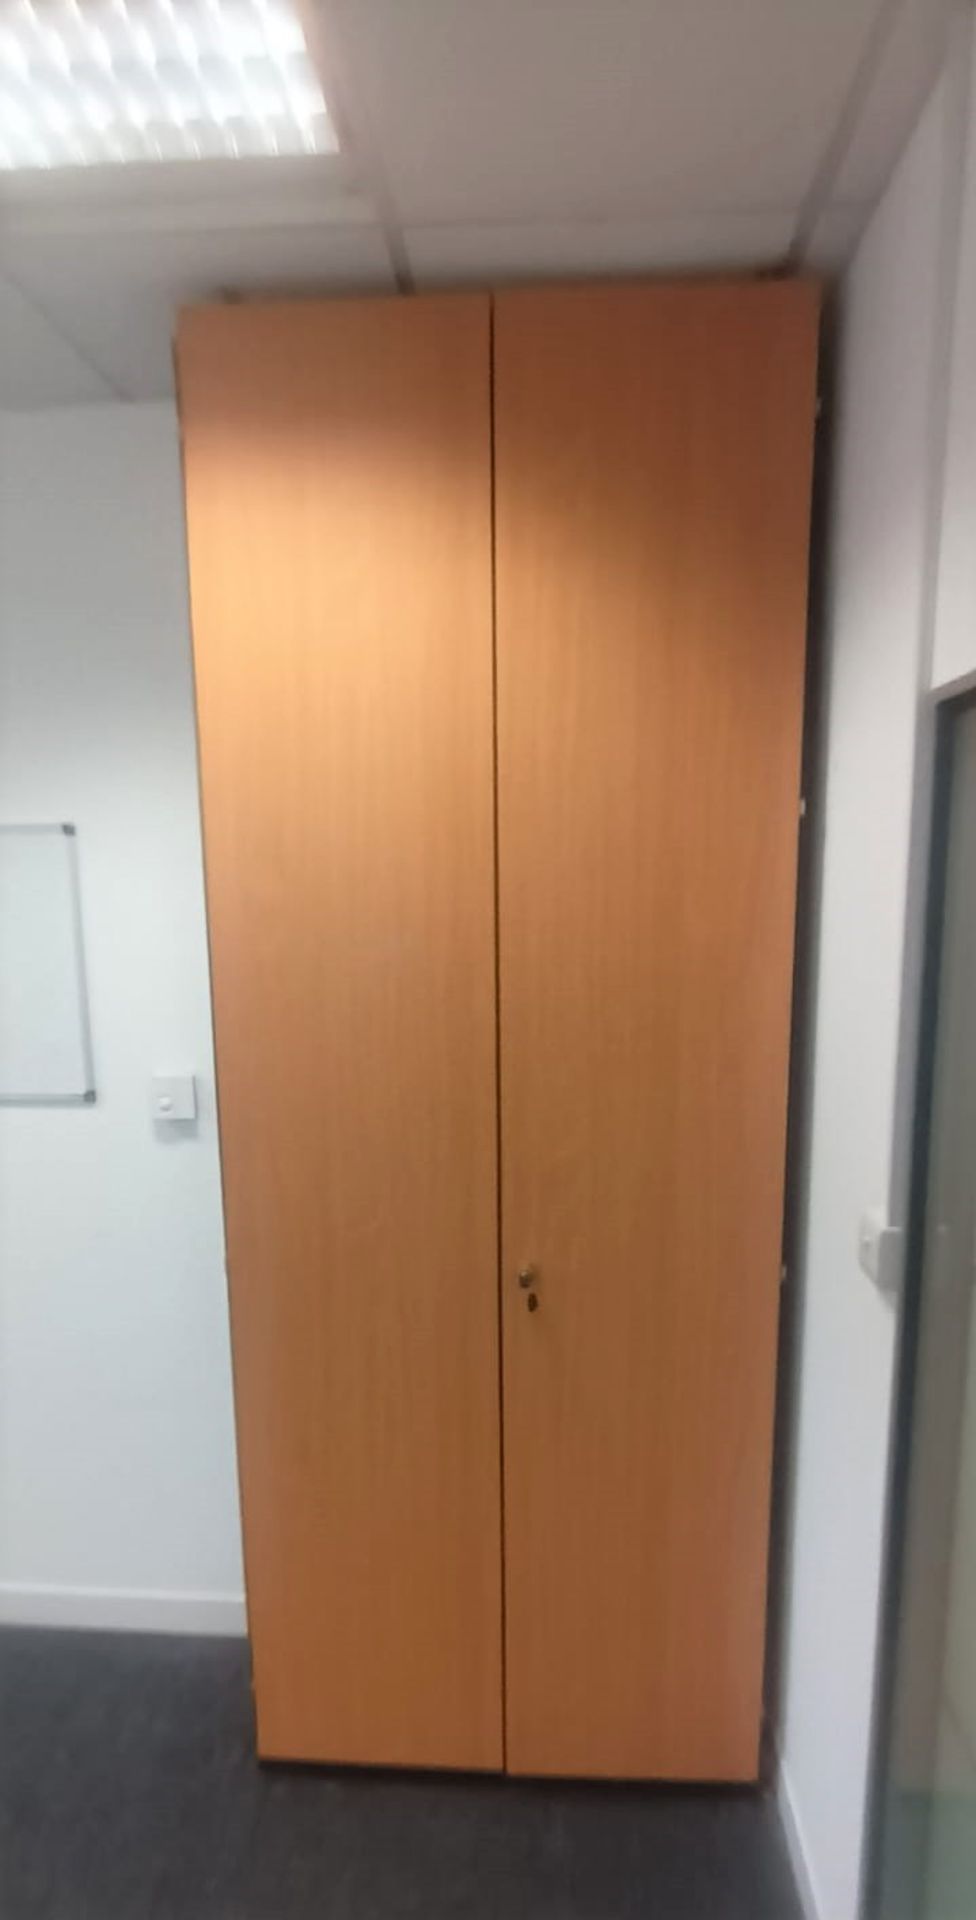 1 x Two Door Office Storage Caninet With Internal Shelves - Ref: TV504 - Size: 140 x 200 x 45